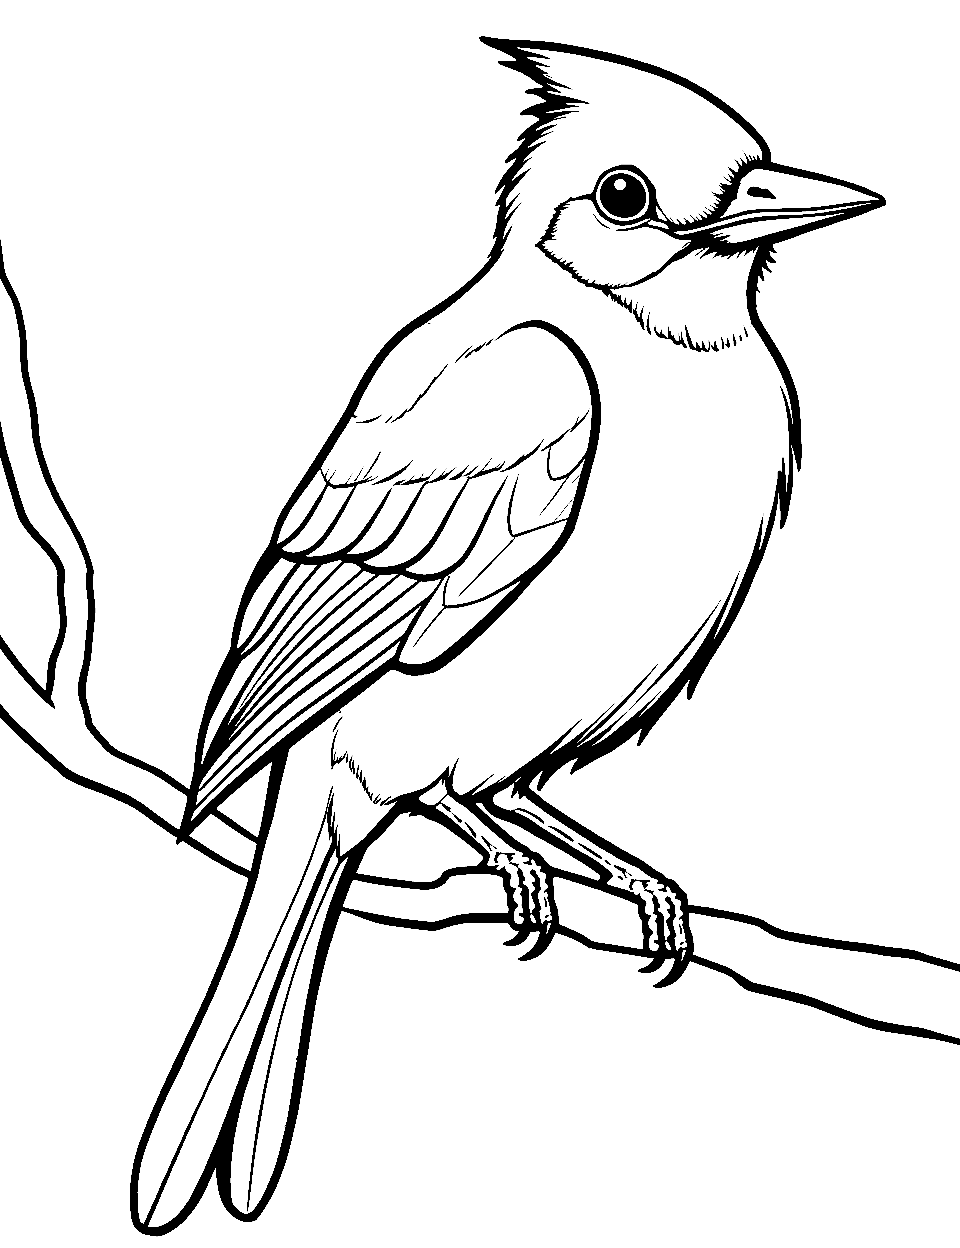 Easy Blue Jay Sketch Coloring Page - A simple design of a blue jay waiting to be colored.